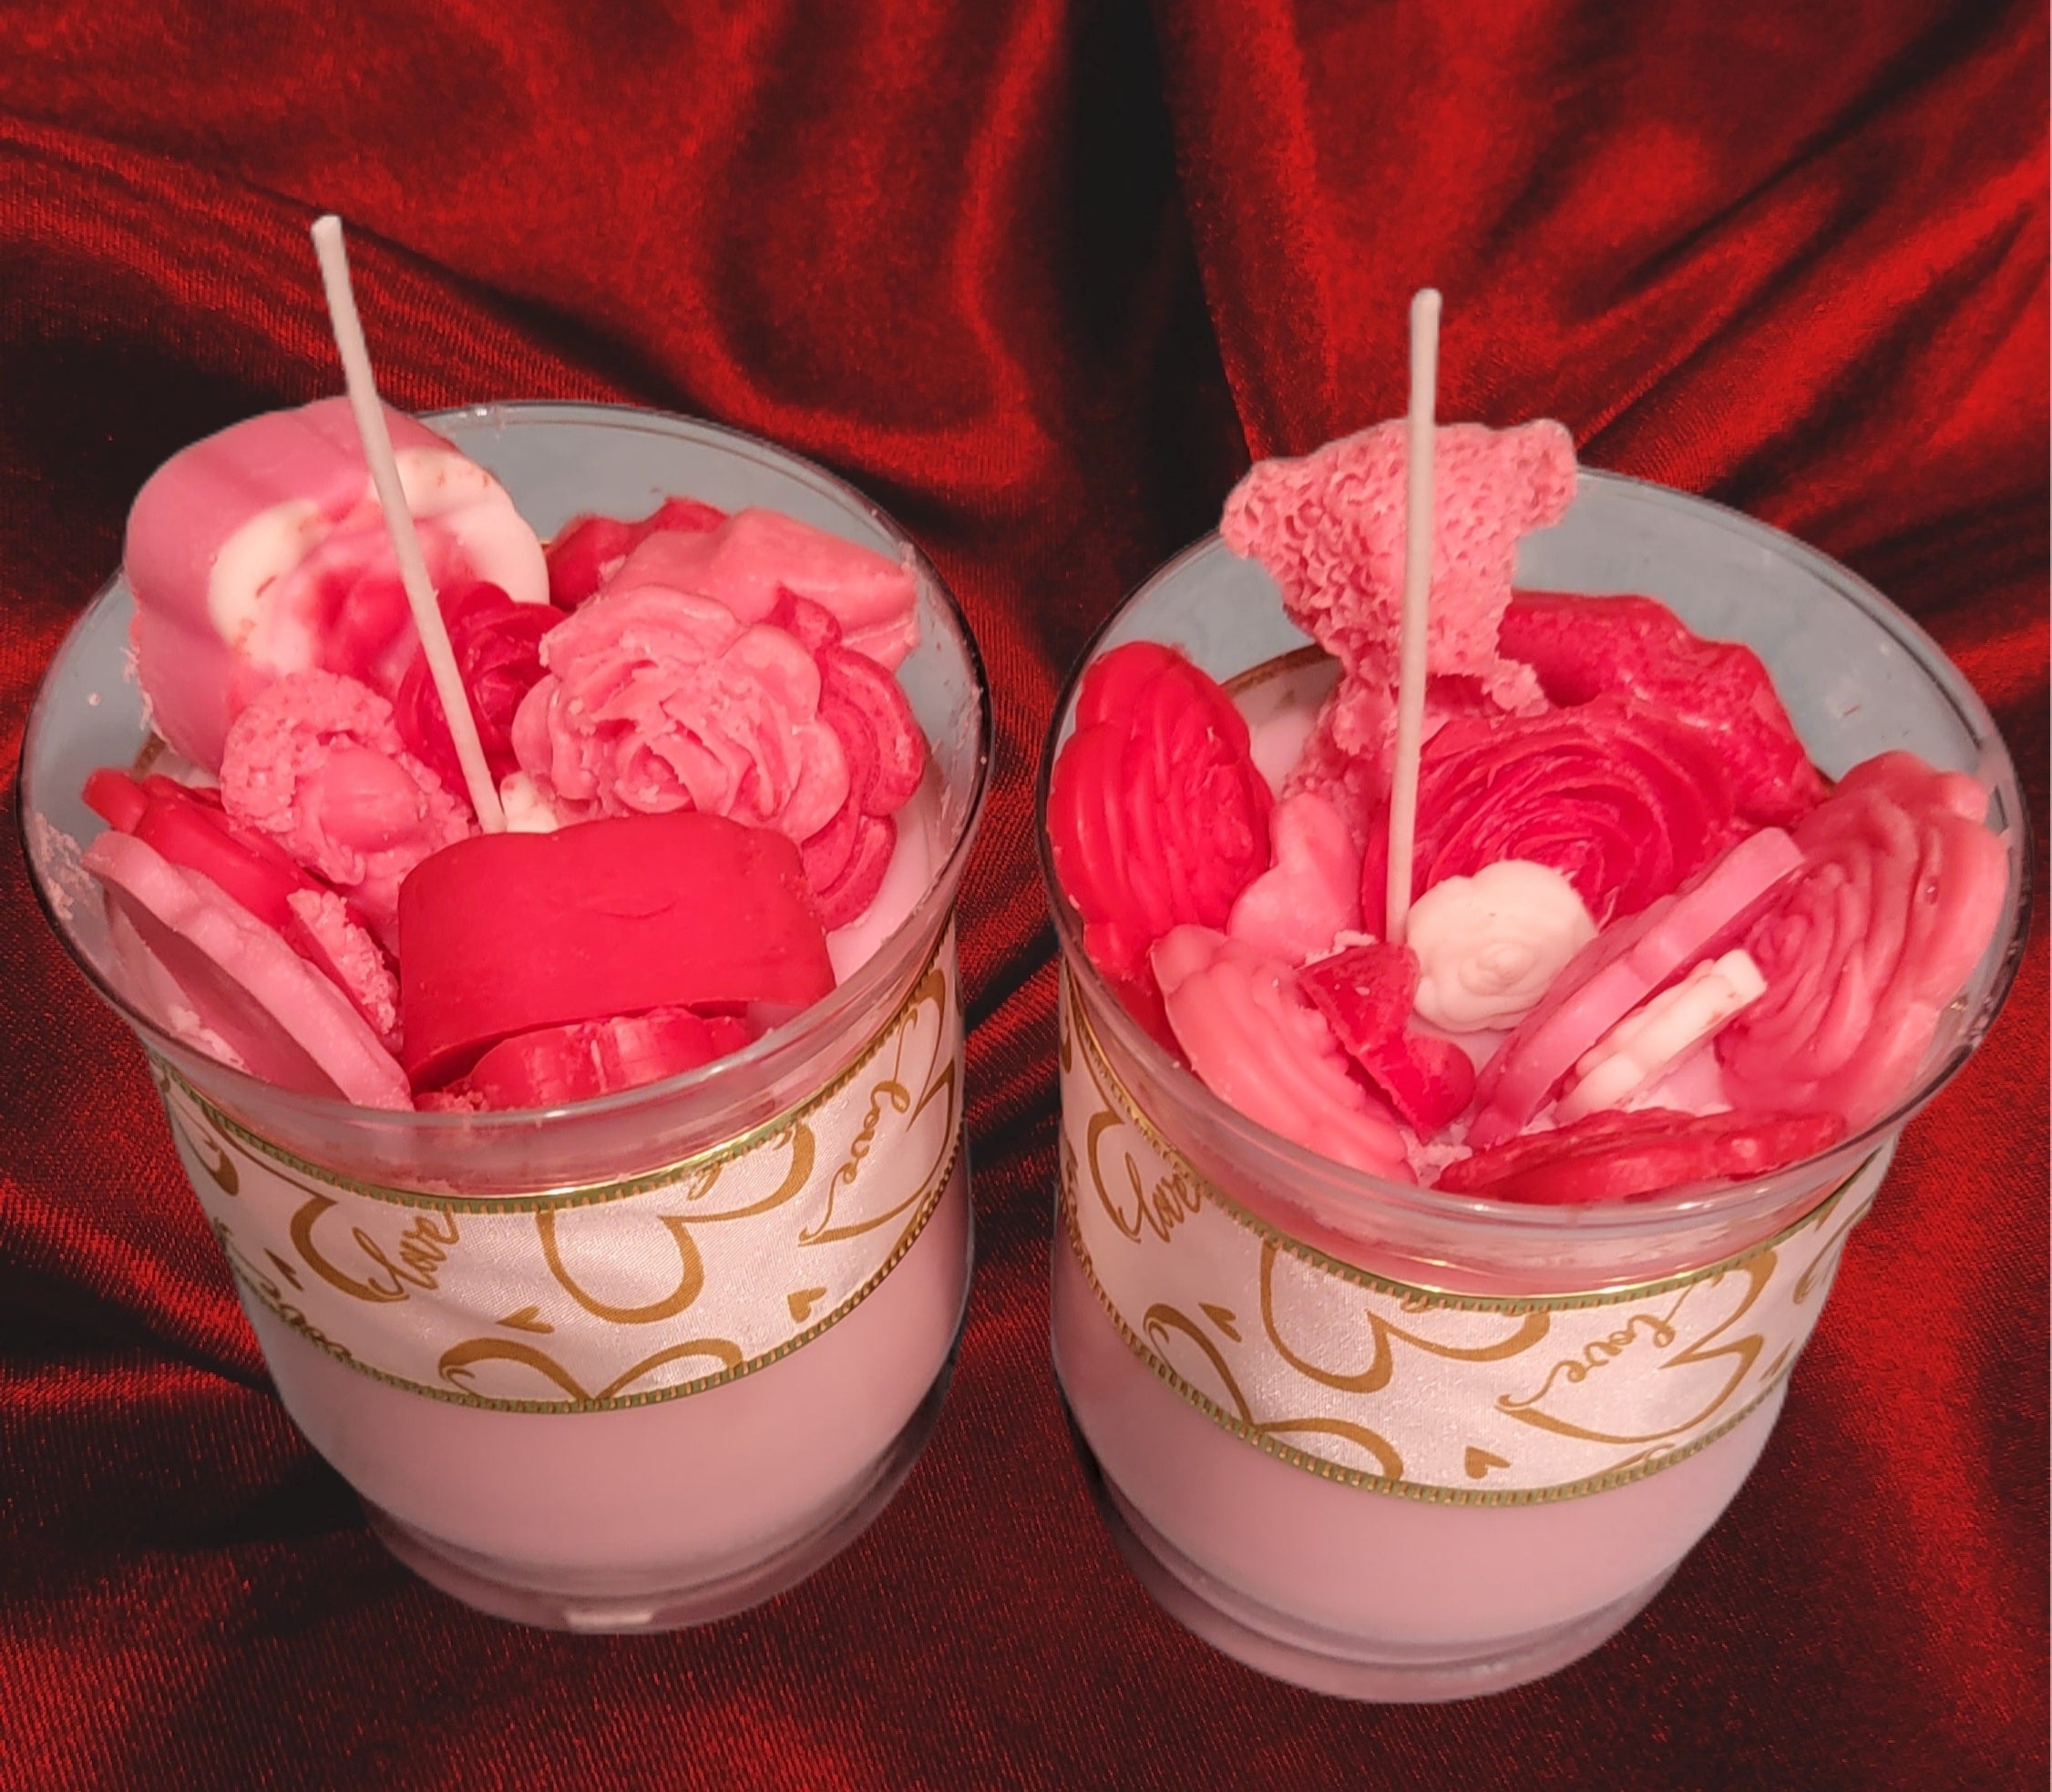 Dozen of Roses 2 in 1 Candle,